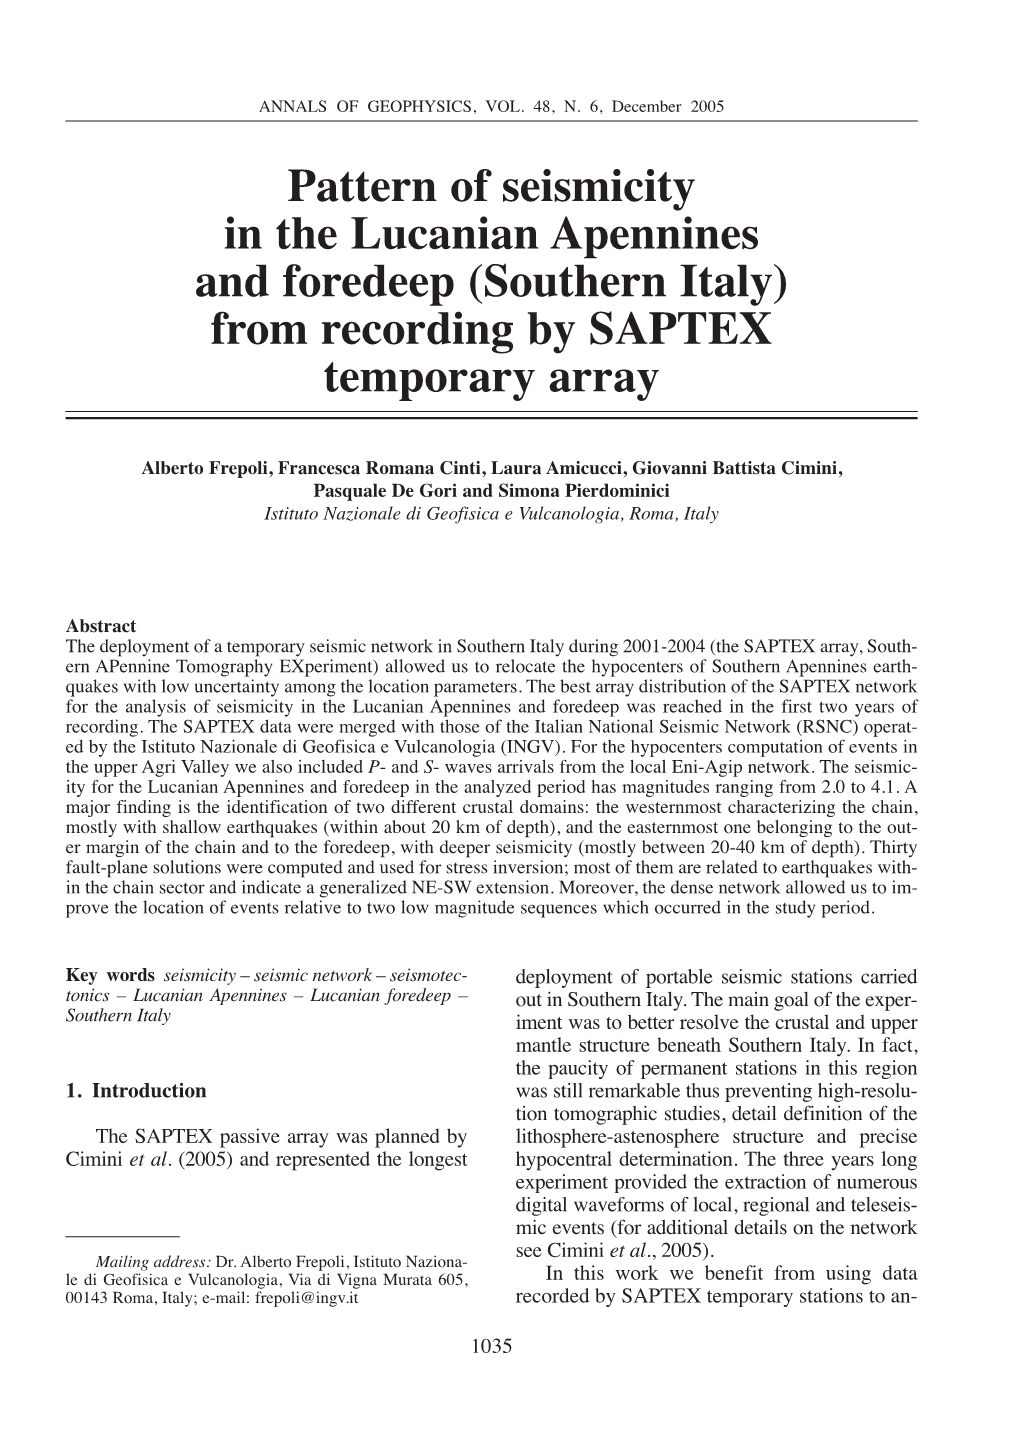 Pattern of Seismicity in the Lucanian Apennines and Foredeep (Southern Italy) from Recording by SAPTEX Temporary Array